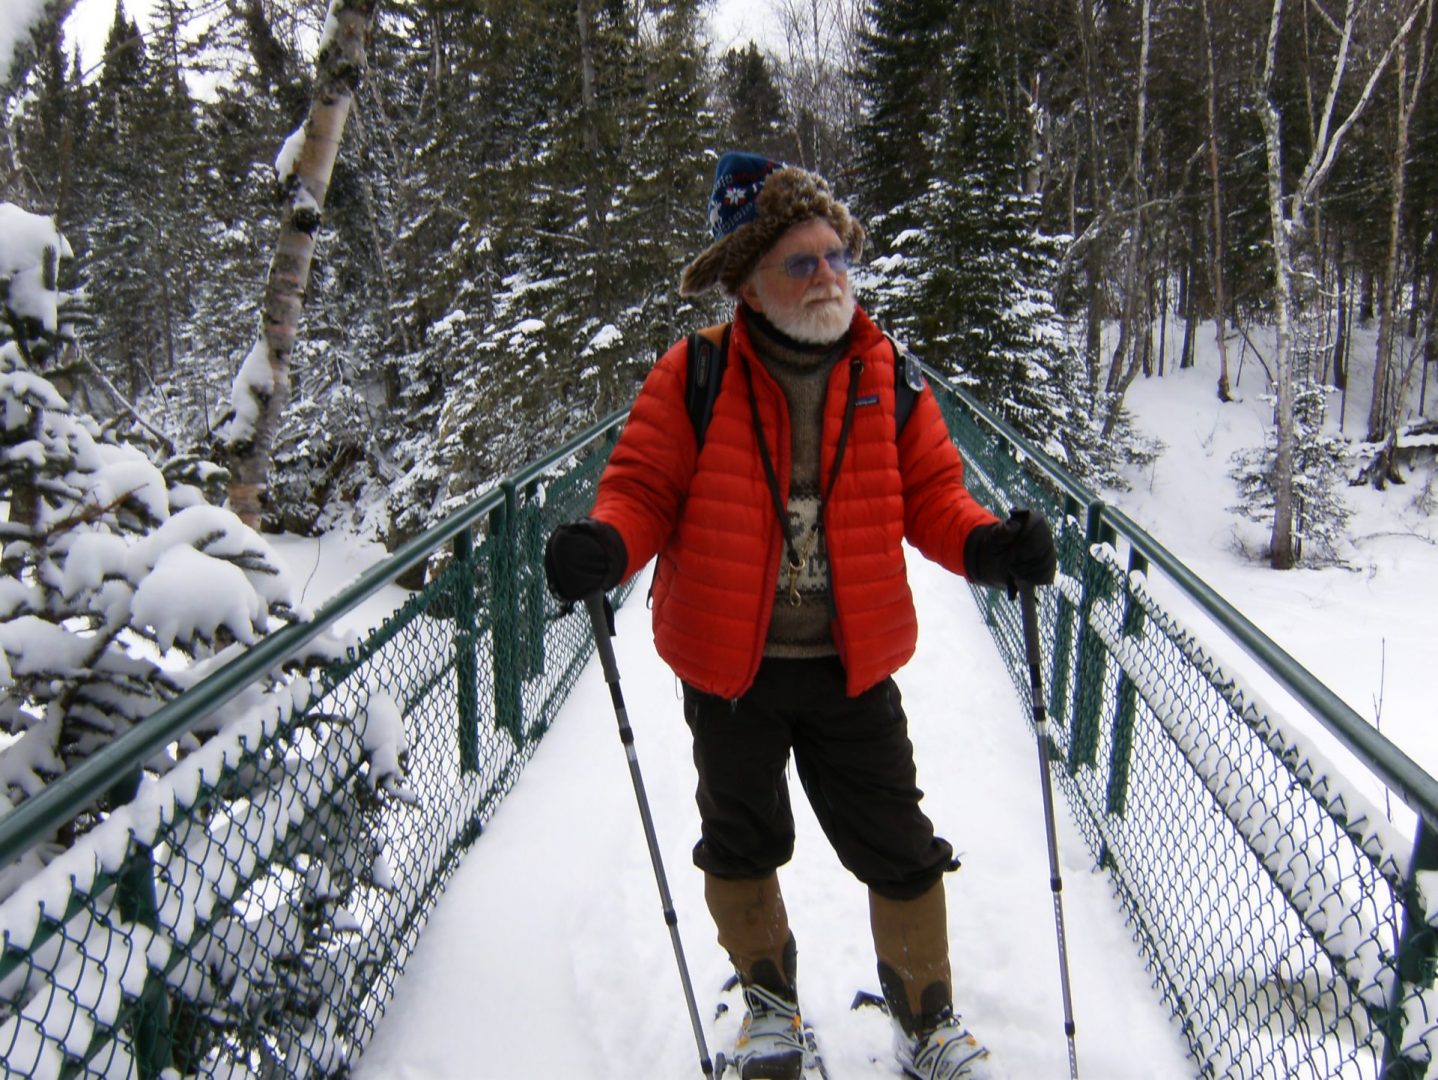 Paul posing for a photo in a snowy wooded area. He is standing on a bridge wearing his snowshoes holding walking poles in both hands. There is lots of snow in the background covering the trees and bridge.